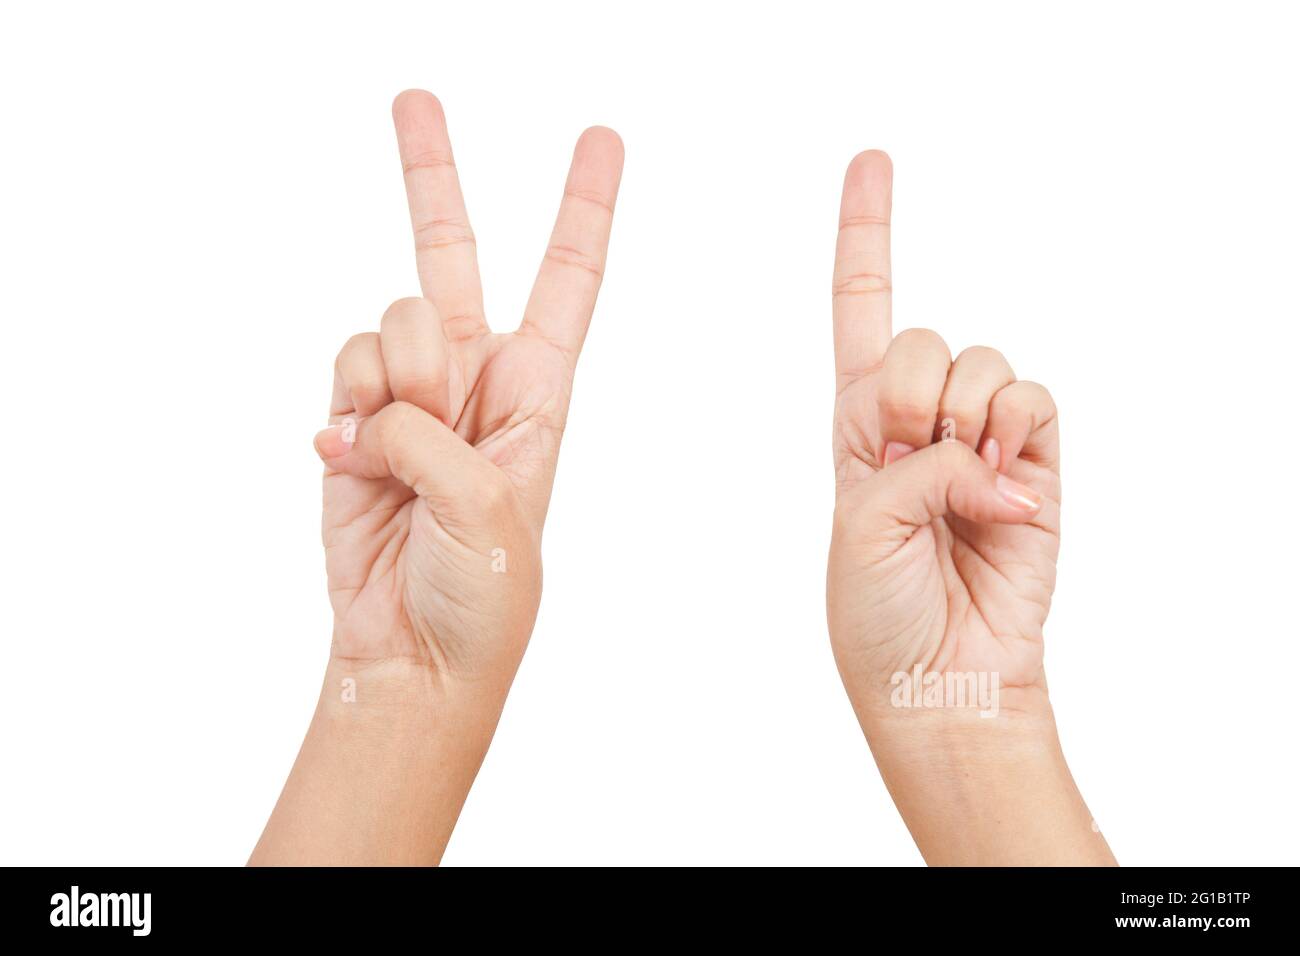 Woman hand showing fingers; Photo on white background. Stock Photo